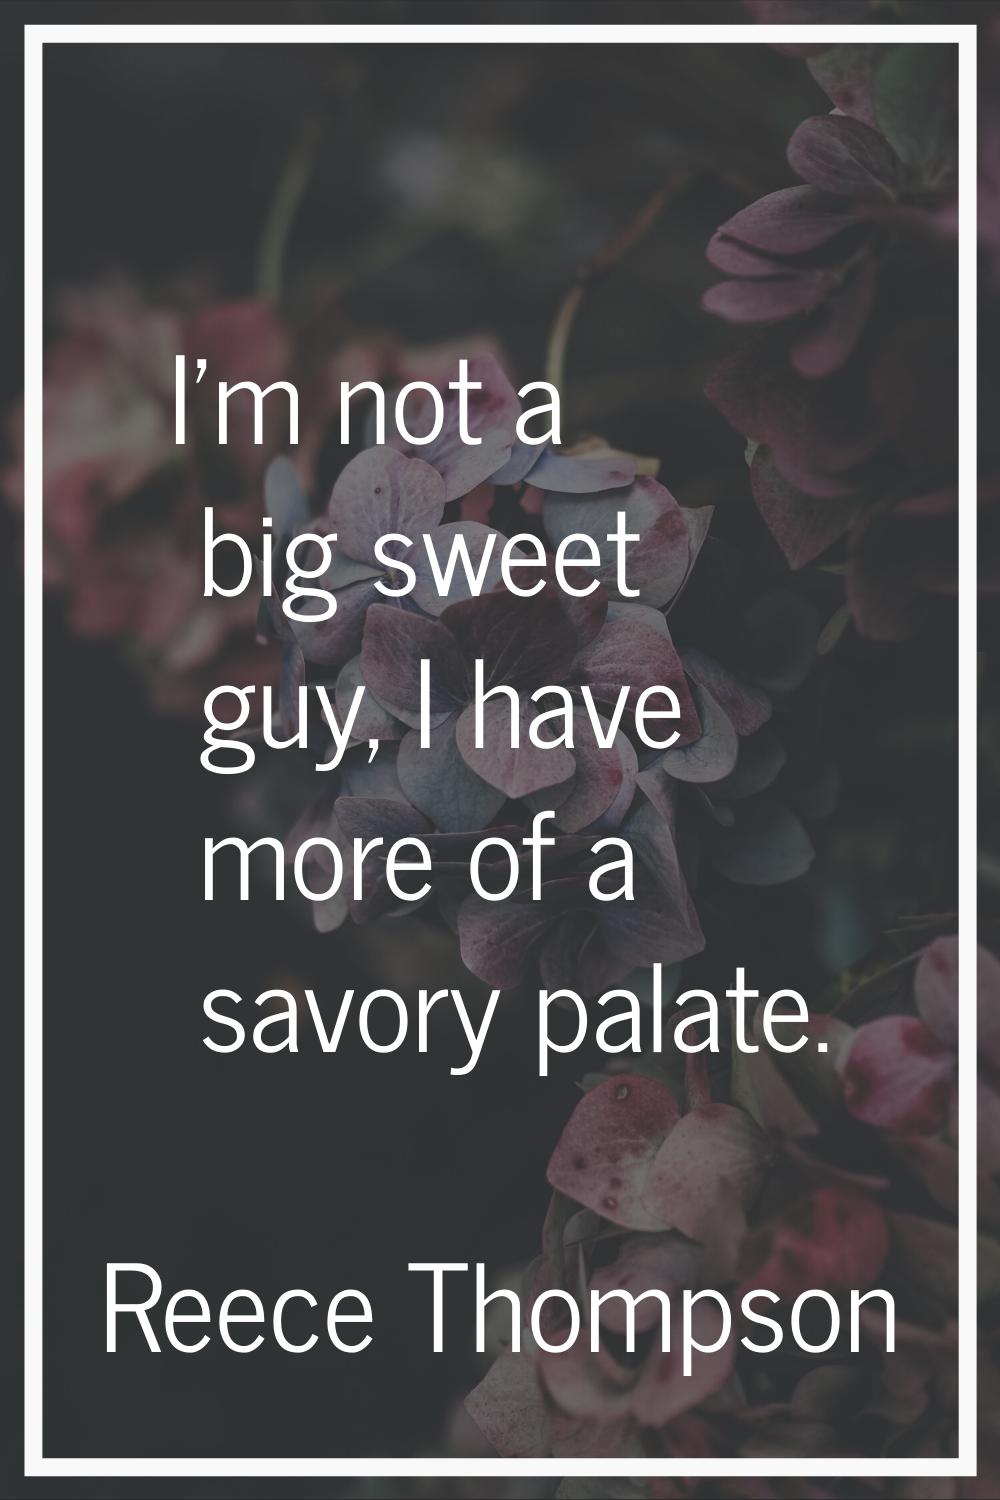 I'm not a big sweet guy, I have more of a savory palate.